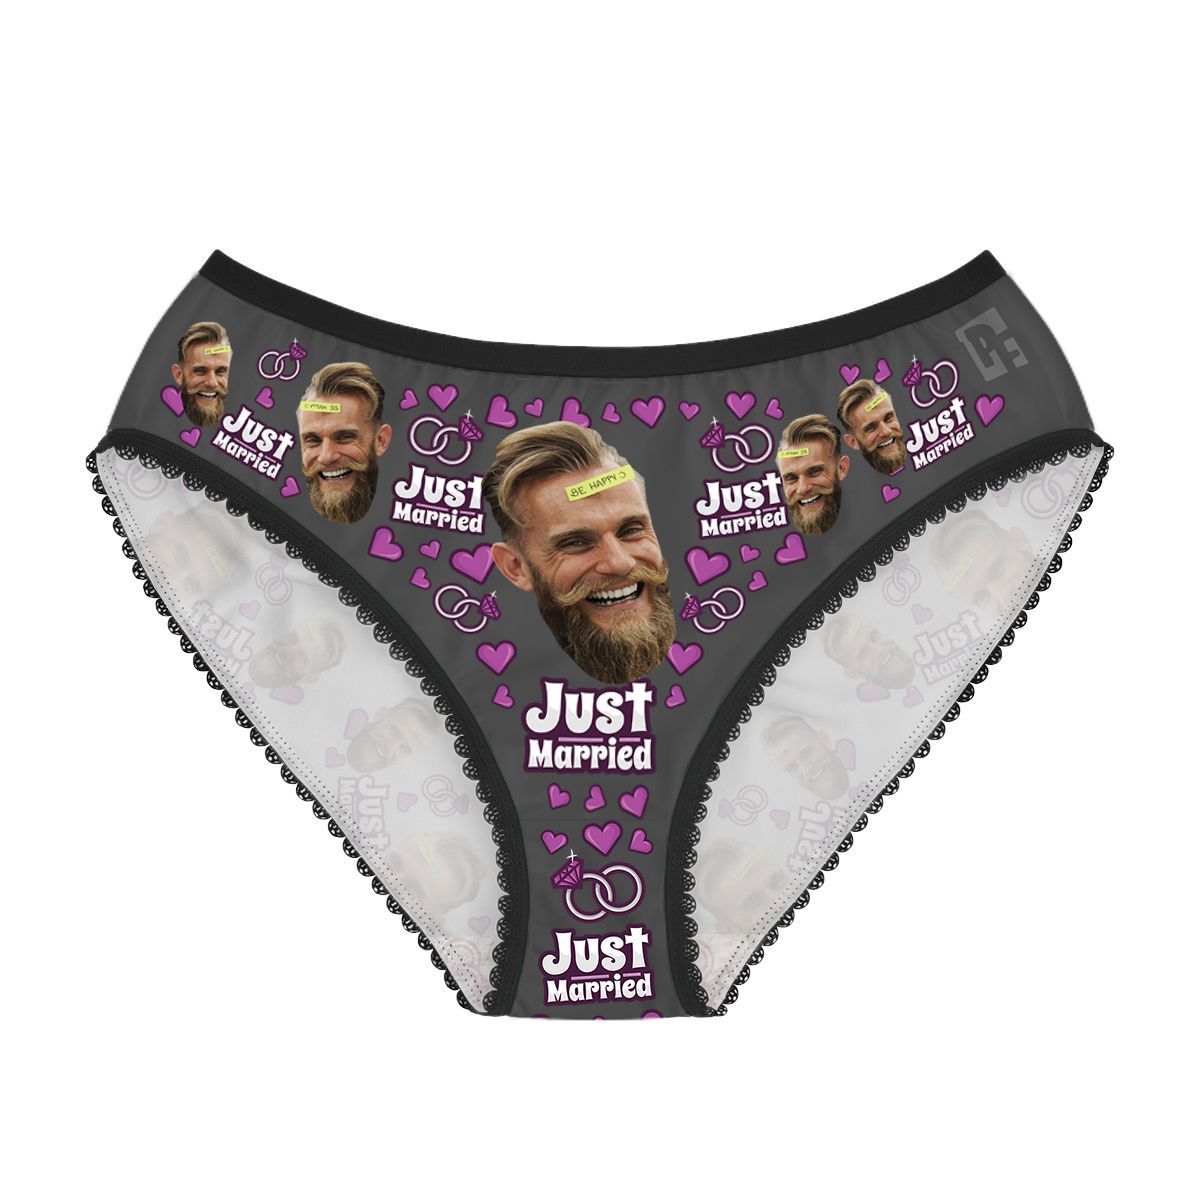 Mint Just married women's underwear briefs personalized with photo printed on them